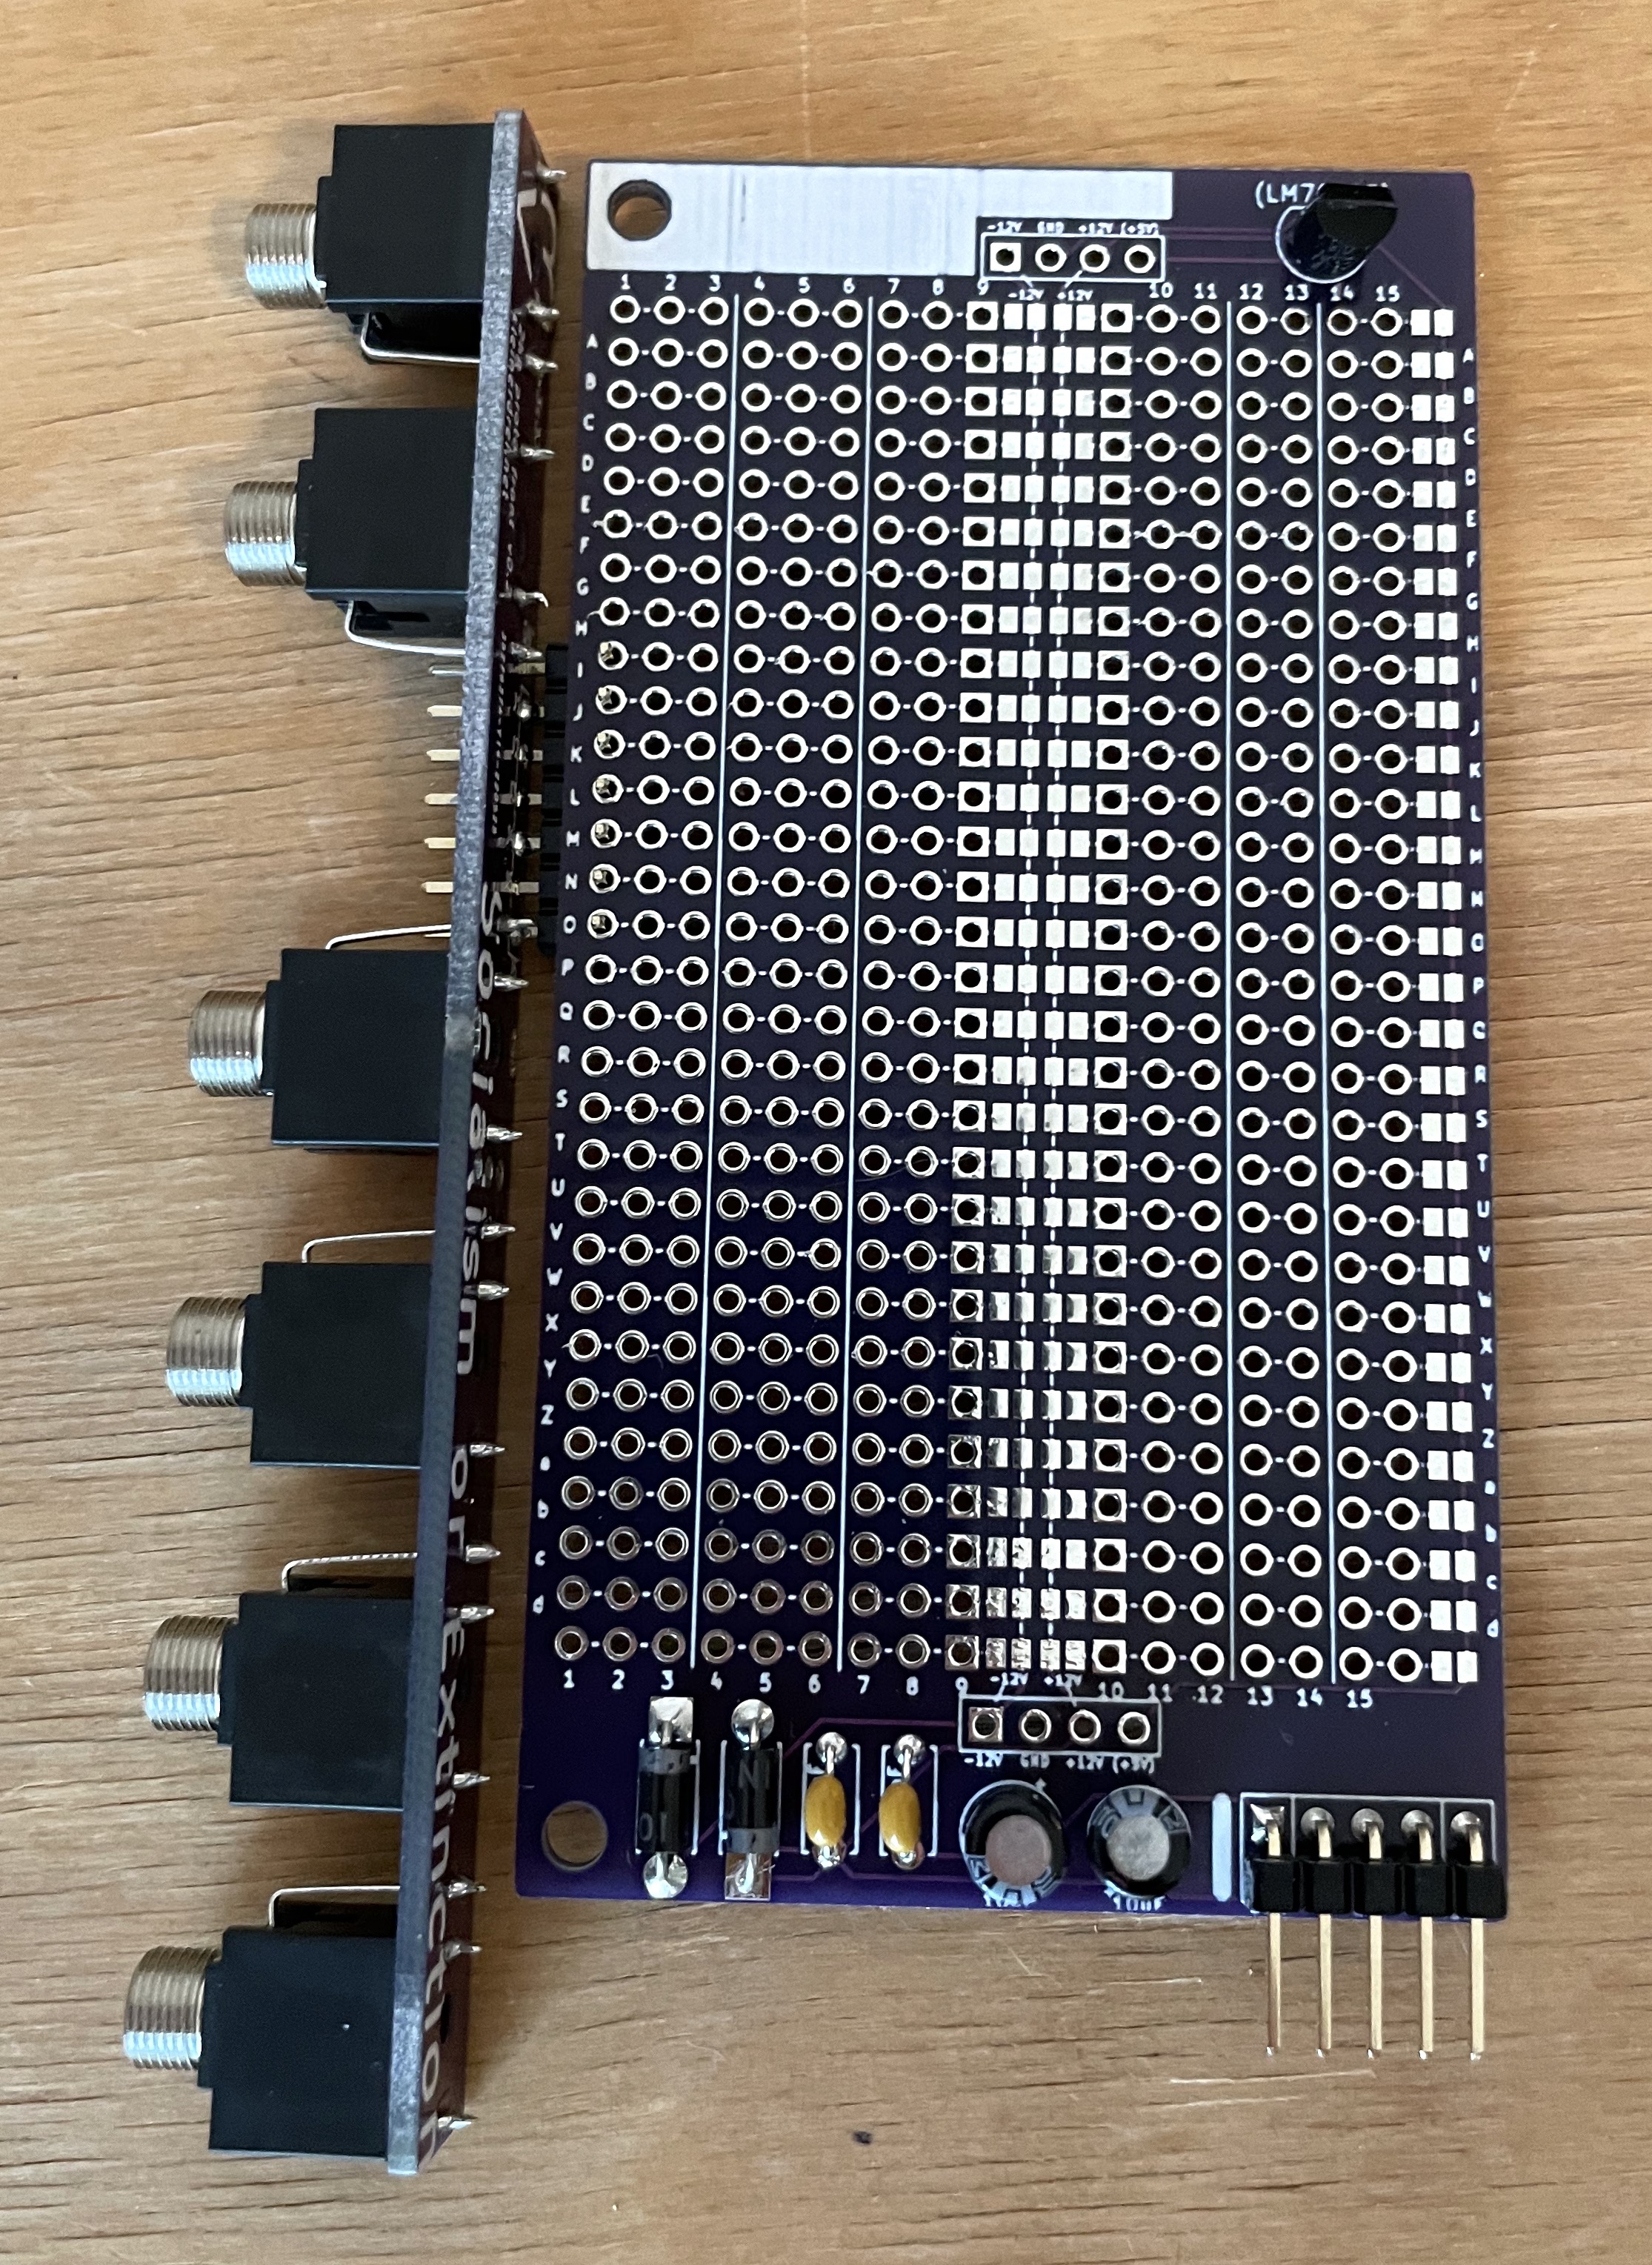 Photo of nucleus board with power supply components soldered in. It is connected to another PCB with sockets attached.